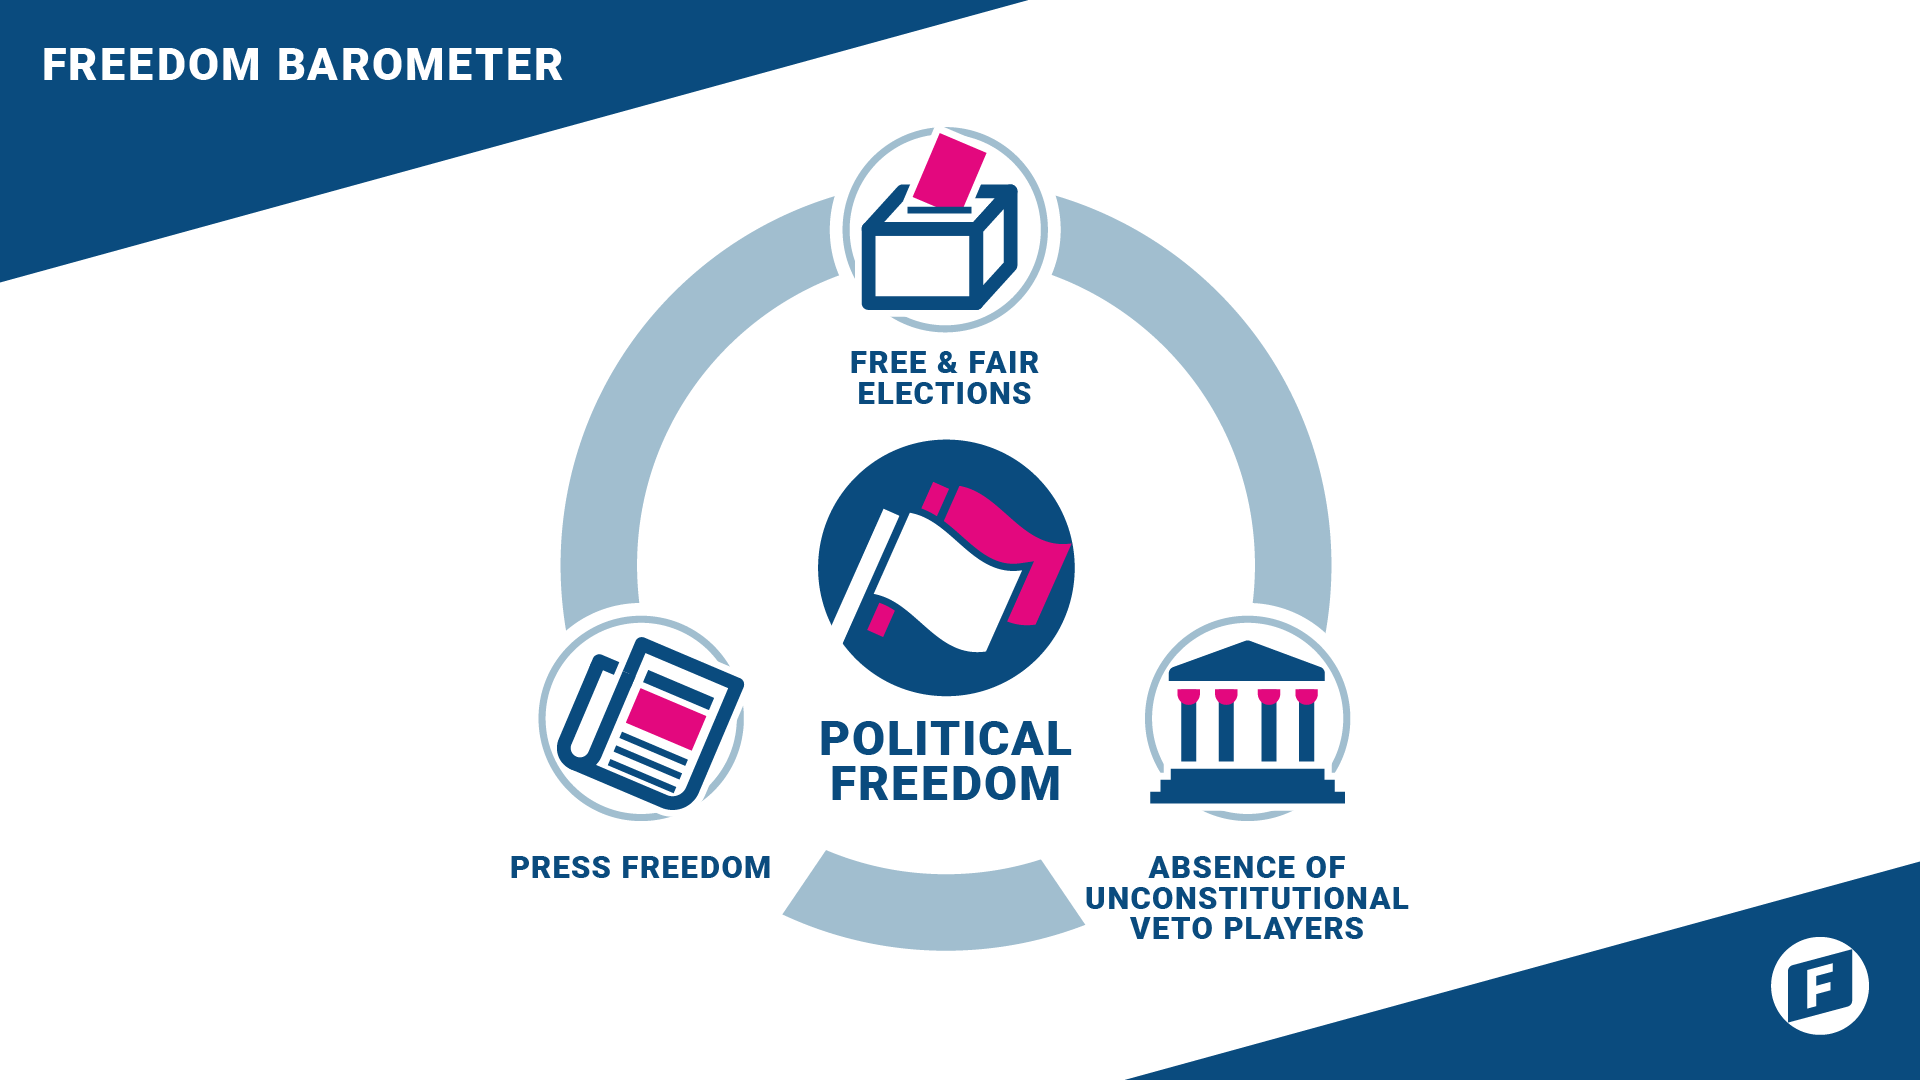 Freedom Barometer - Political Freedom Overview